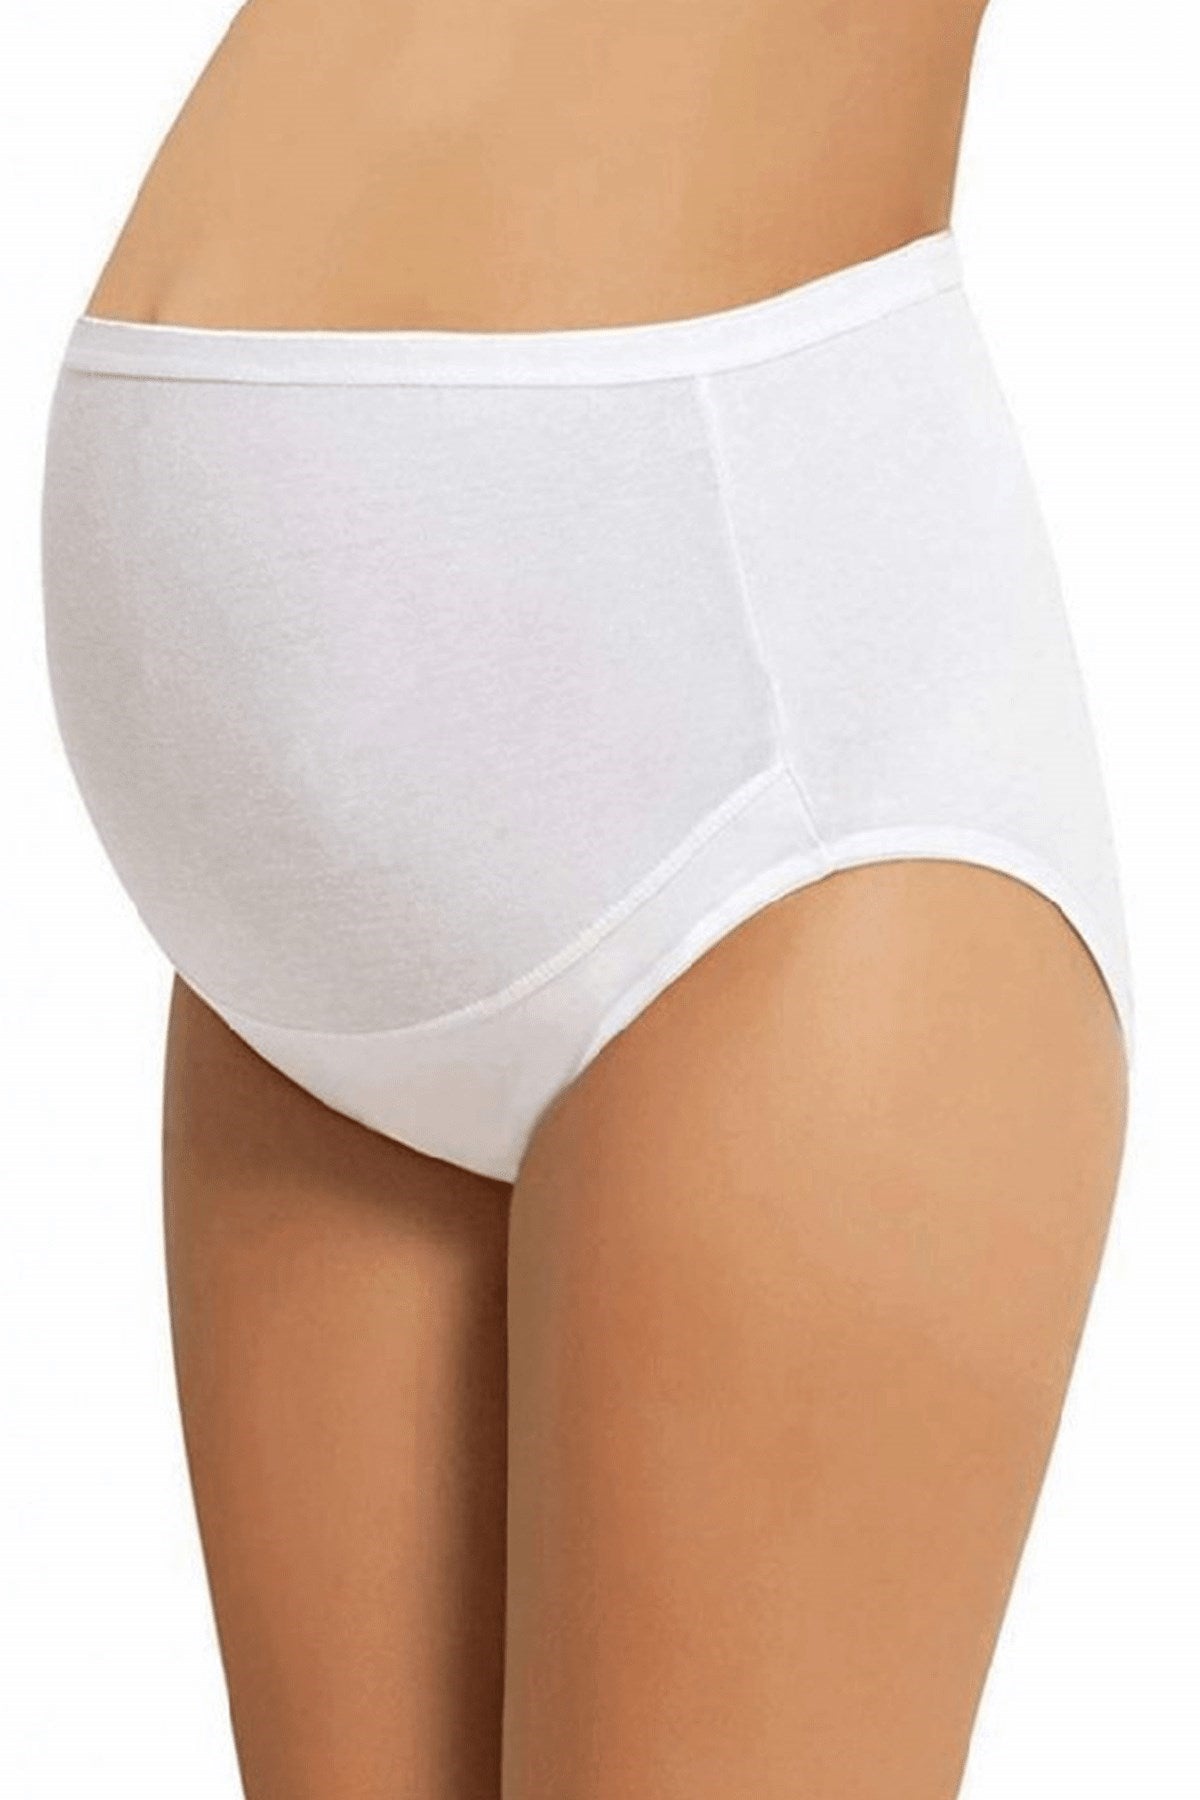 Shopymommy 1003 Cotton Maternity Panties White